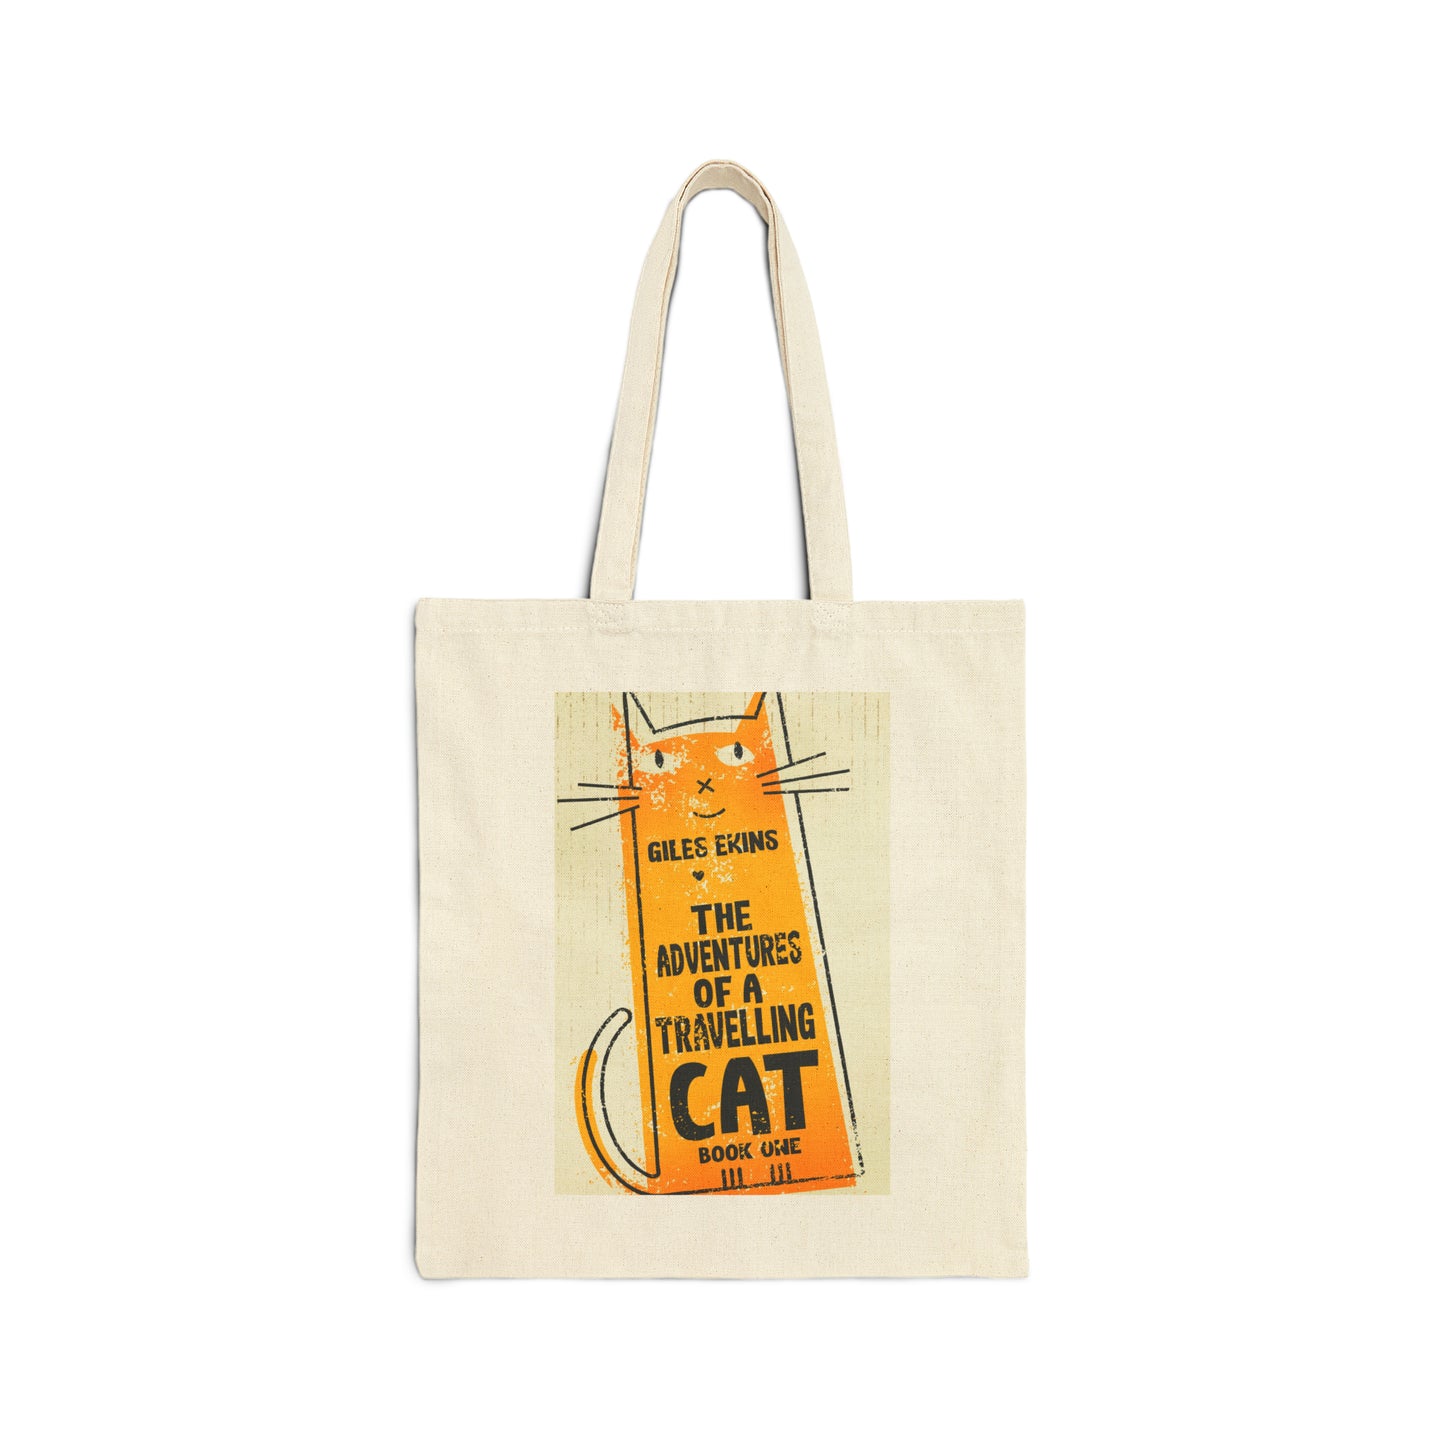 The Adventures Of A Travelling Cat - Cotton Canvas Tote Bag